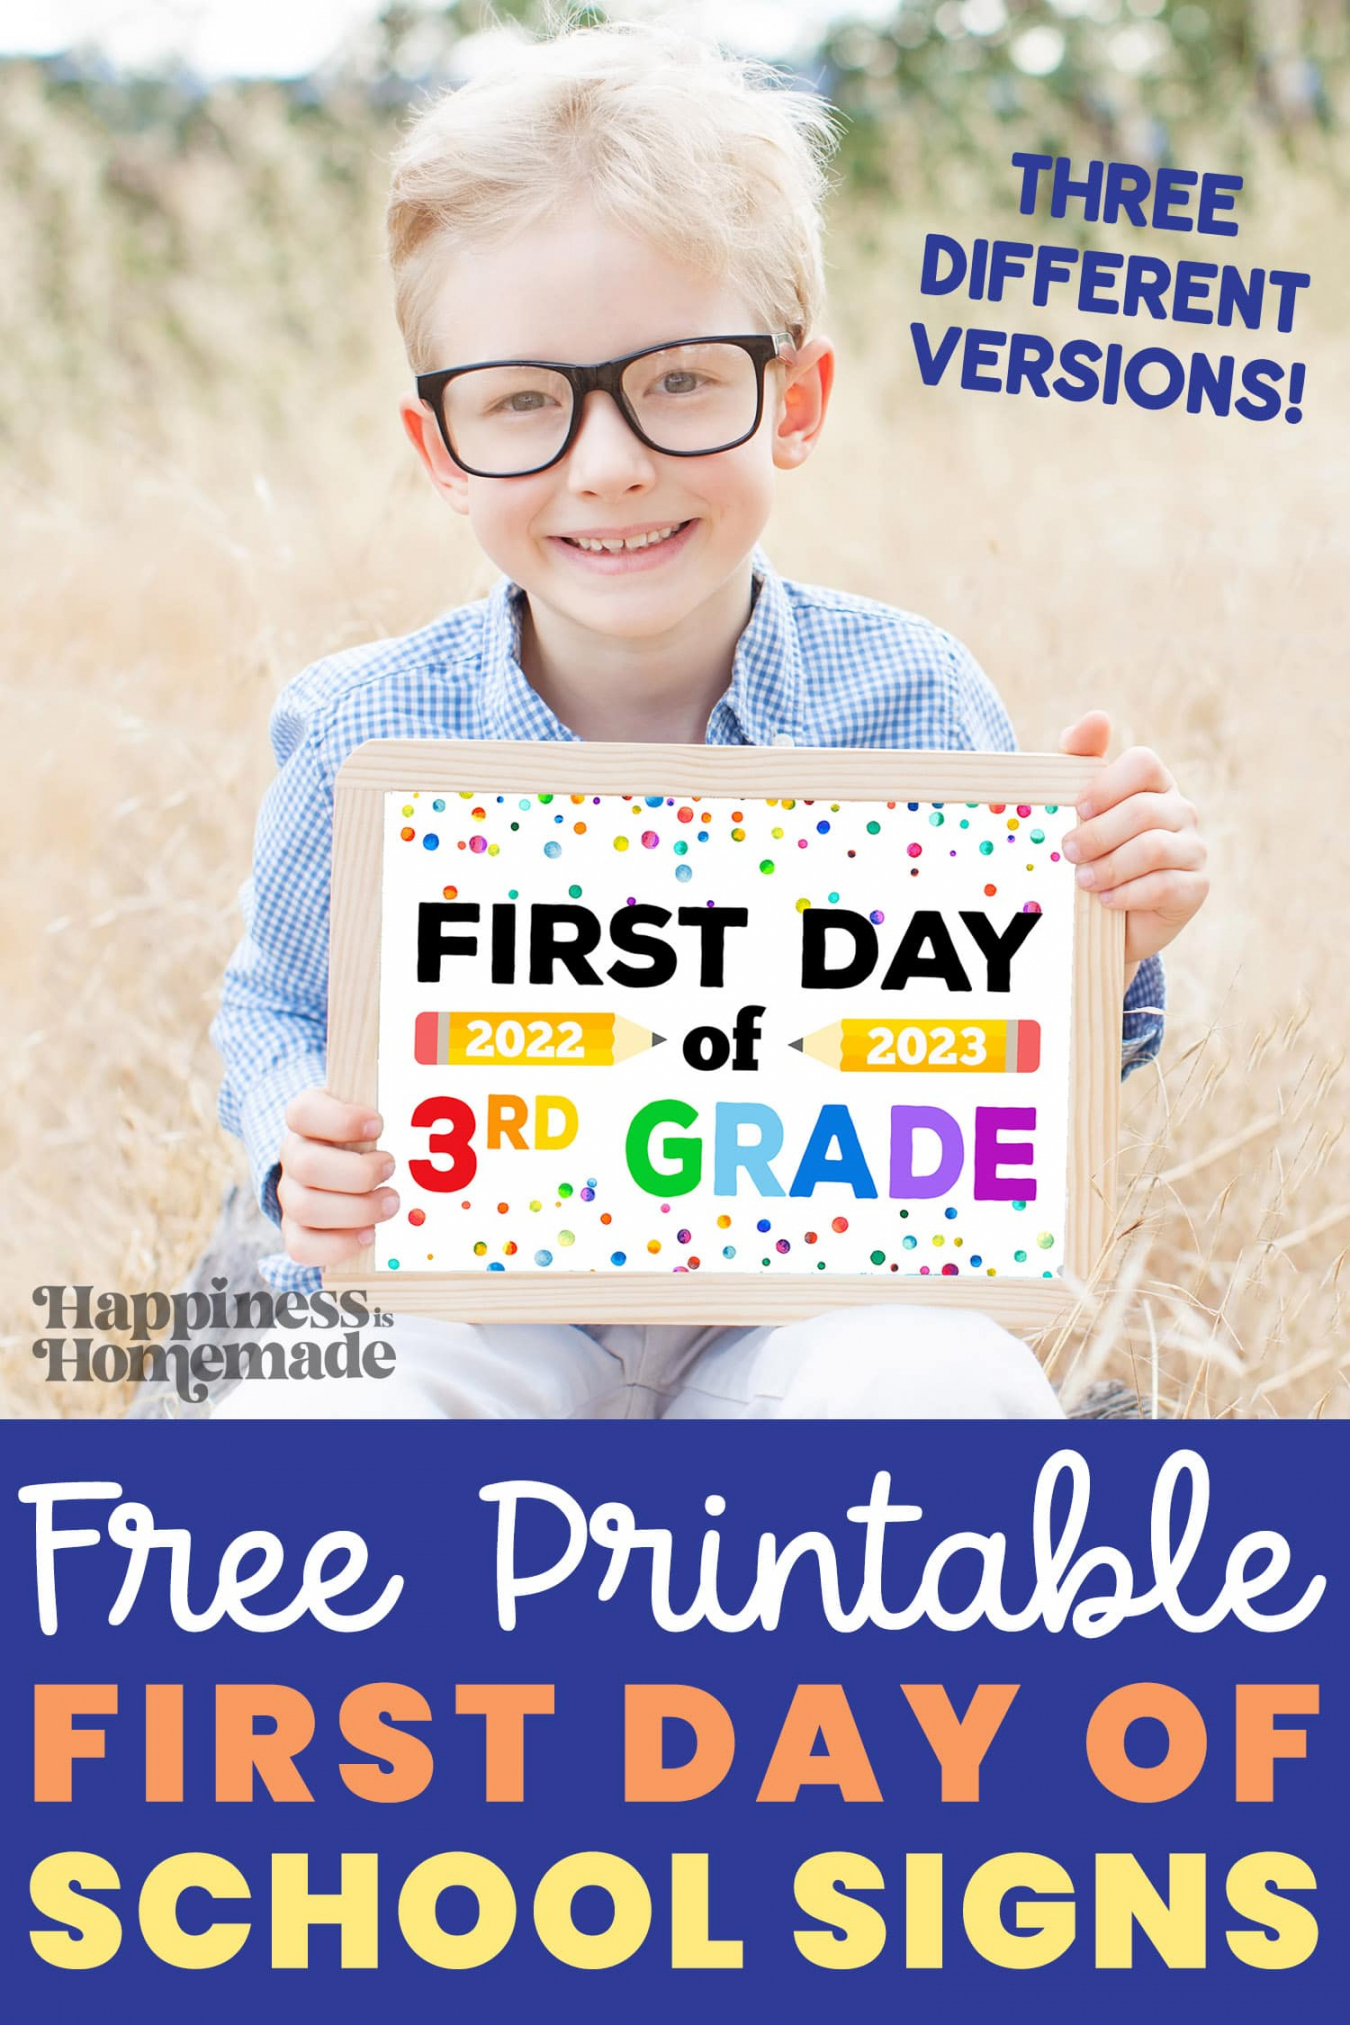 Free Printable First Day of School Signs - - Happiness is  - FREE Printables - First Day Of School Sign Free Printable